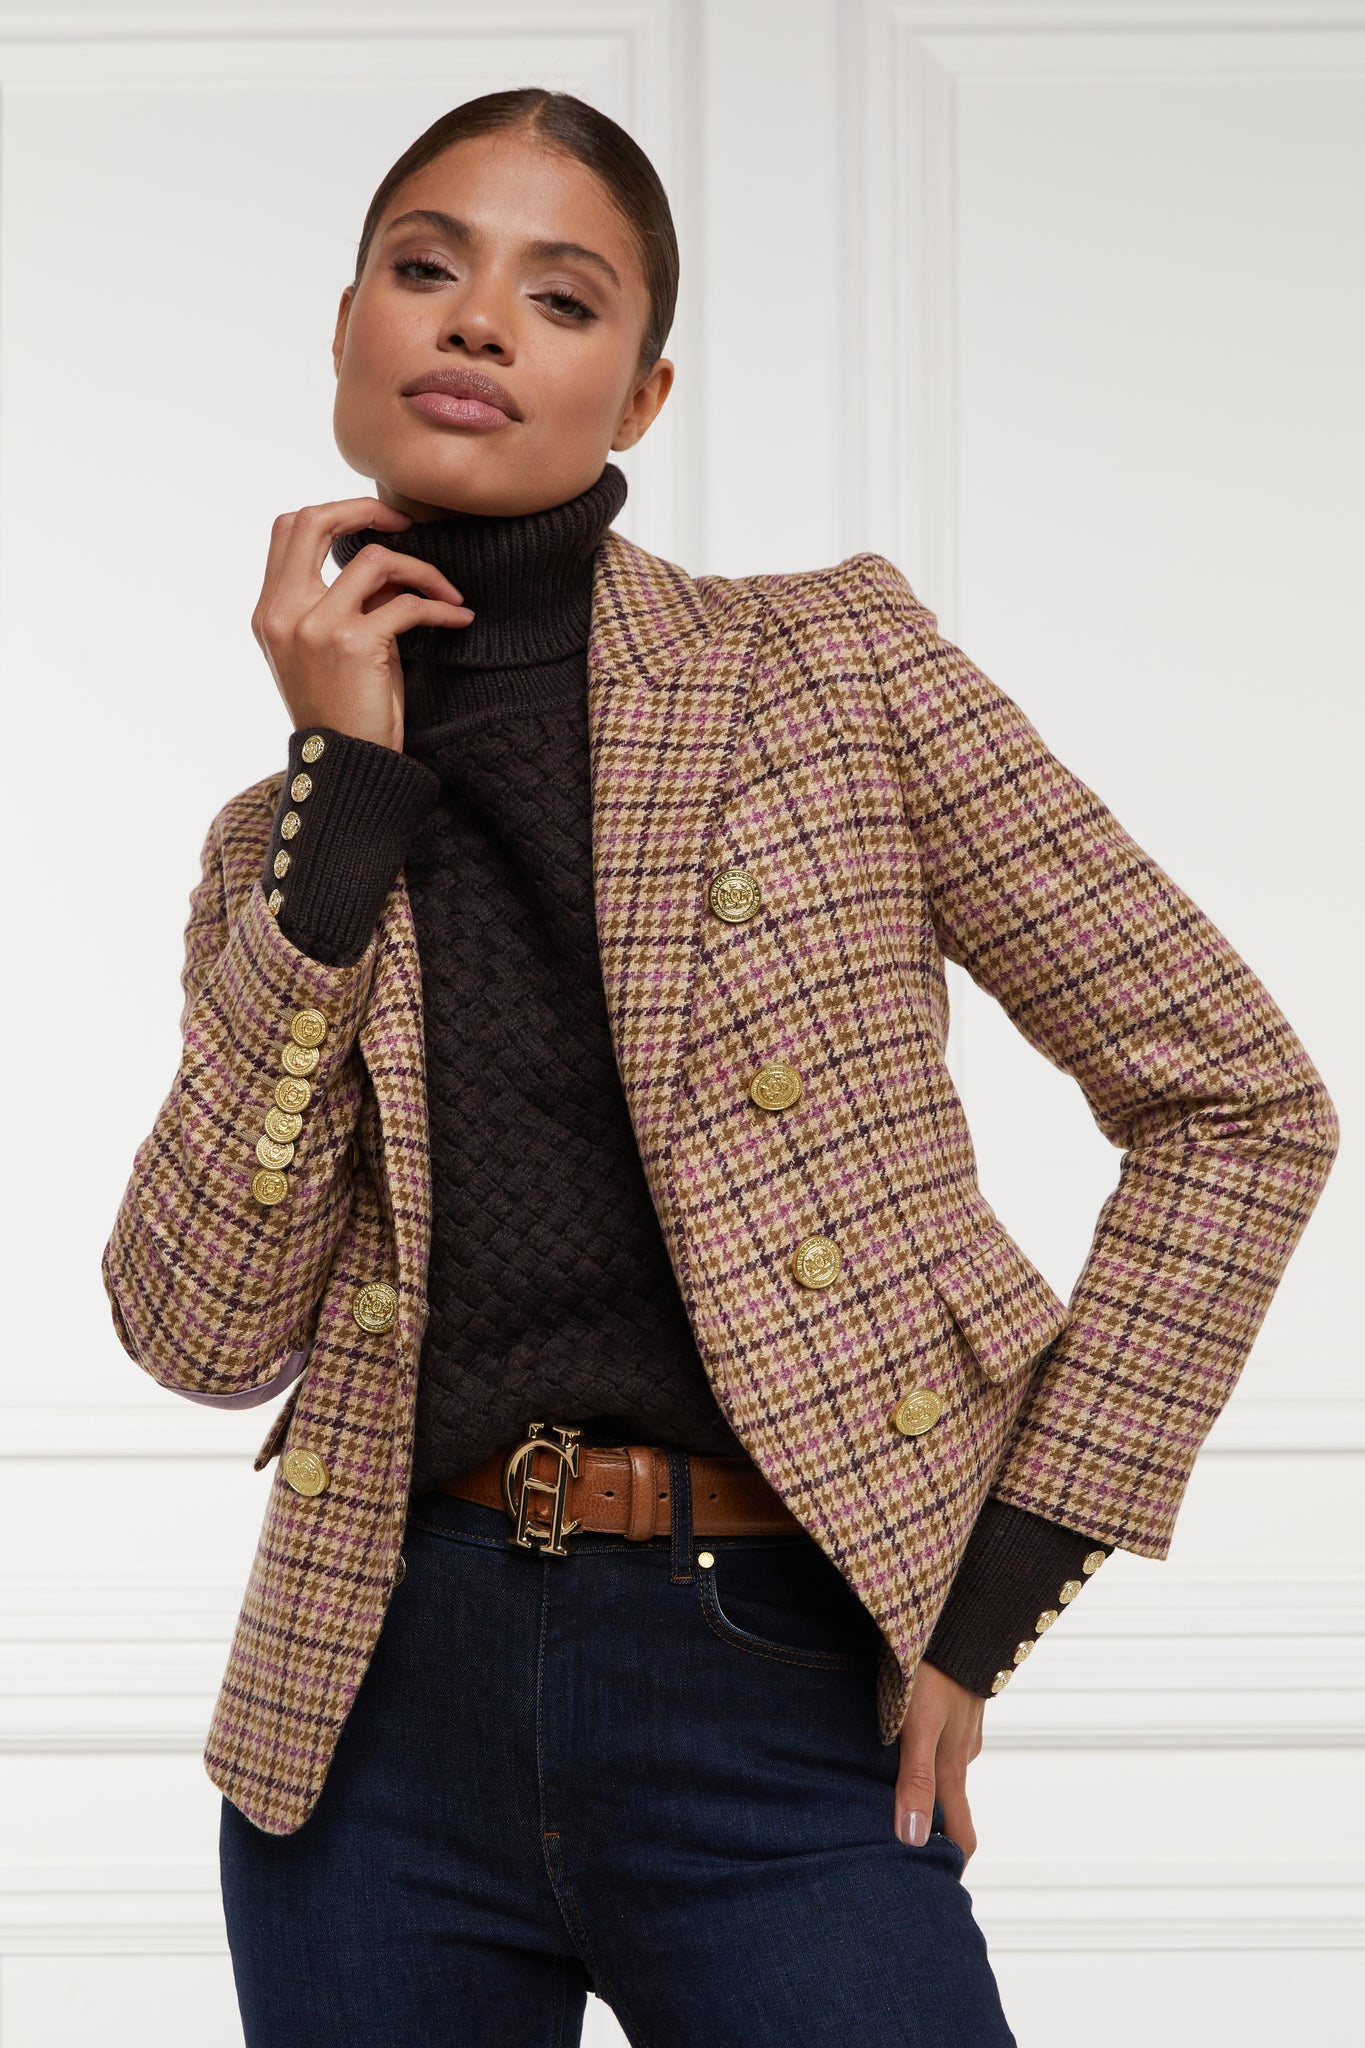 British made double breasted blazer that fastens with a single button hole to create a more form fitting silhouette with two pockets and gold button detailing this blazer is made from pink purple and brown check houndstooth fabric